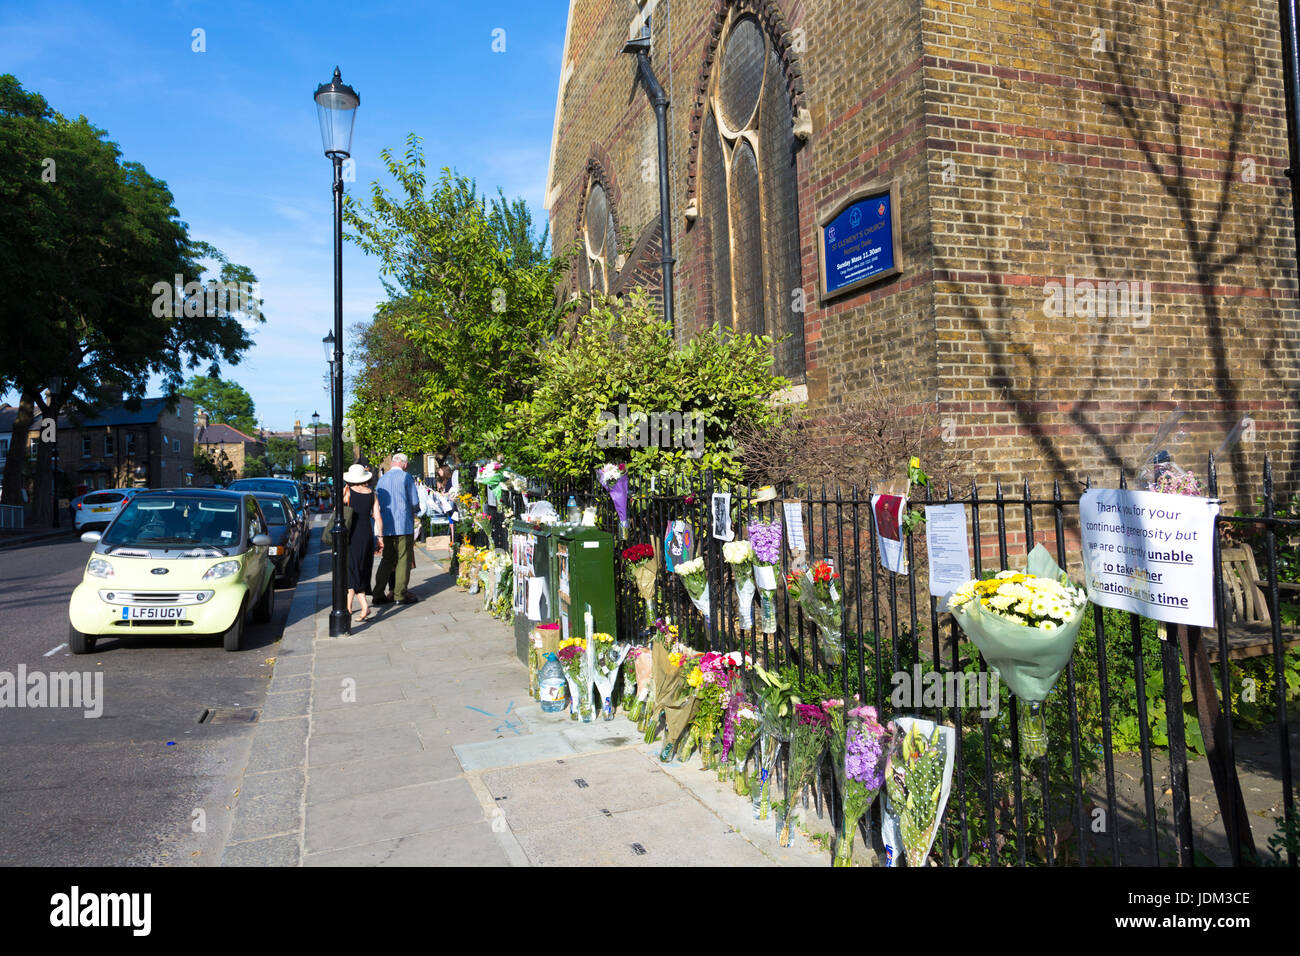 London, UK. 20th June 2017 - On 14 June 2017 Grenfell Tower, a 24-storey high tower block of public housing flats in North Kensington, west London, England was severely damaged by fire, causing a high number of casualties. People have come to lay flowers and pay tributes to the victims who lost their lives in the fire. Stock Photo